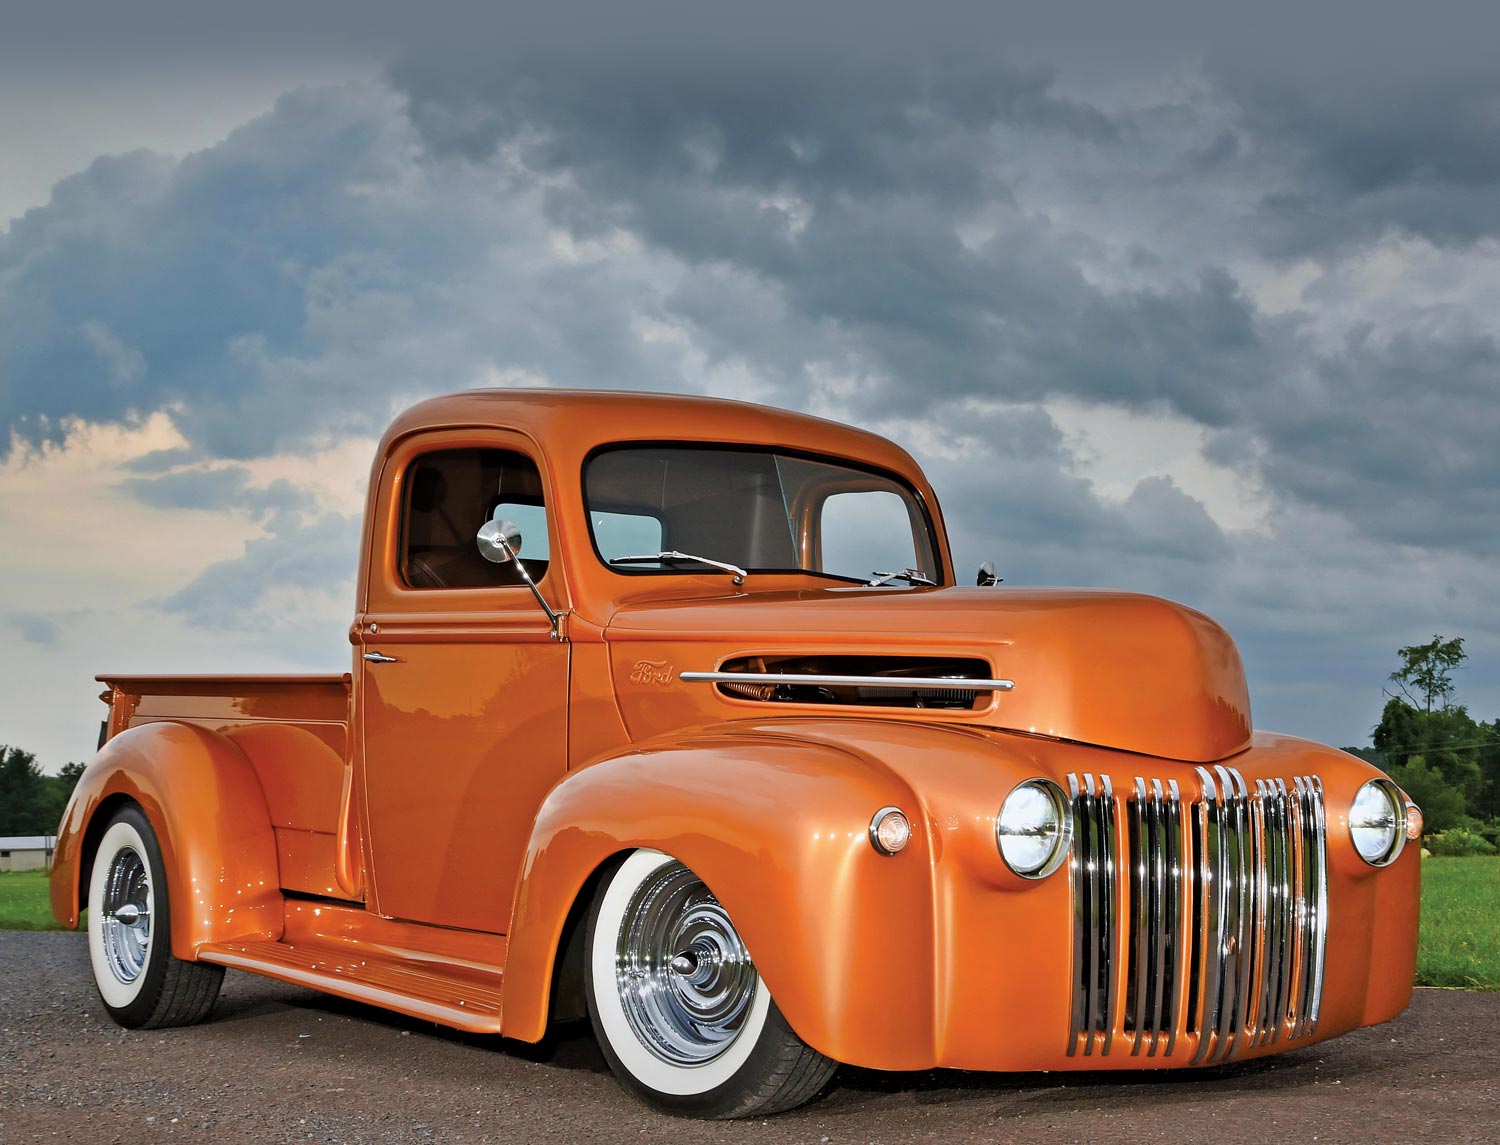 The ’47 Ford truck